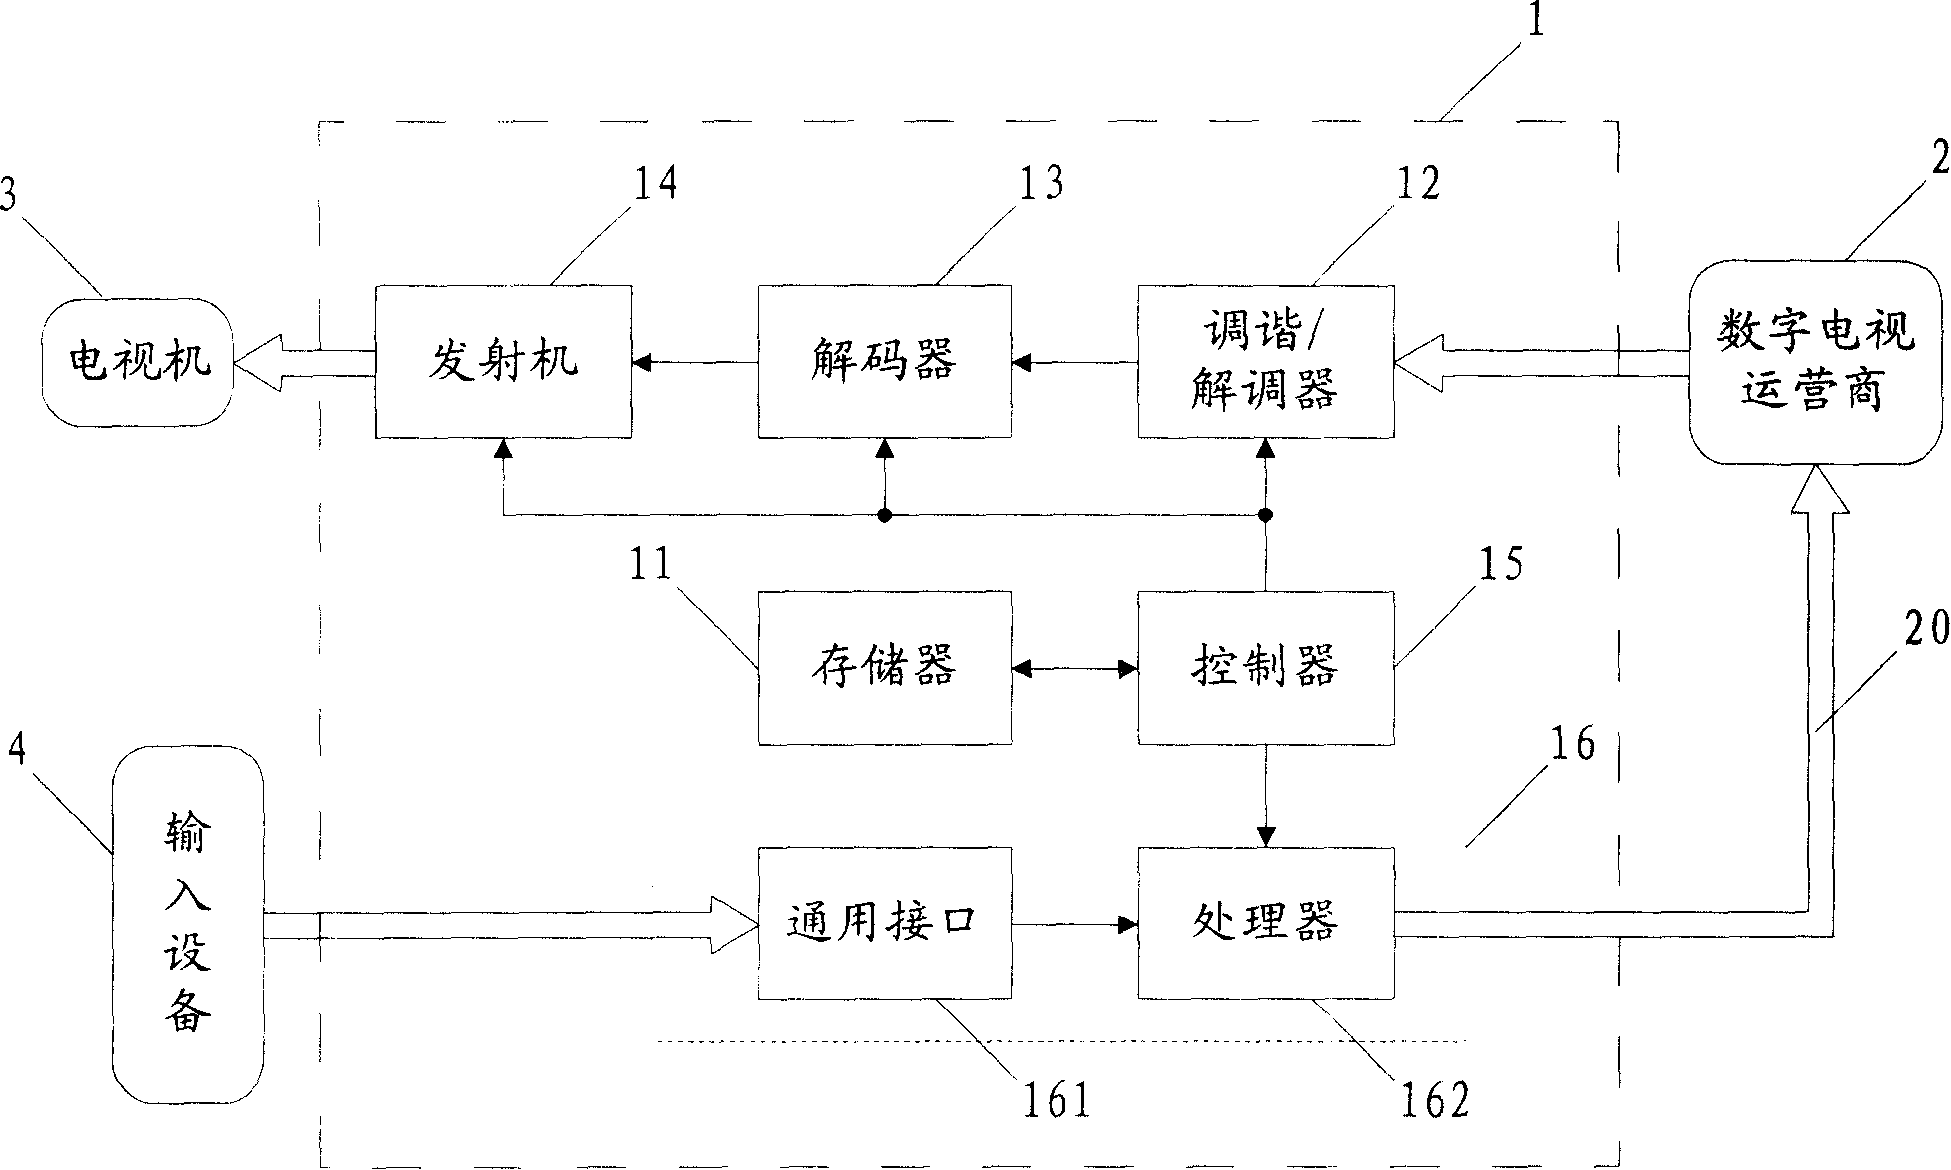 Digital television receiving apparatus and interactive digital television system